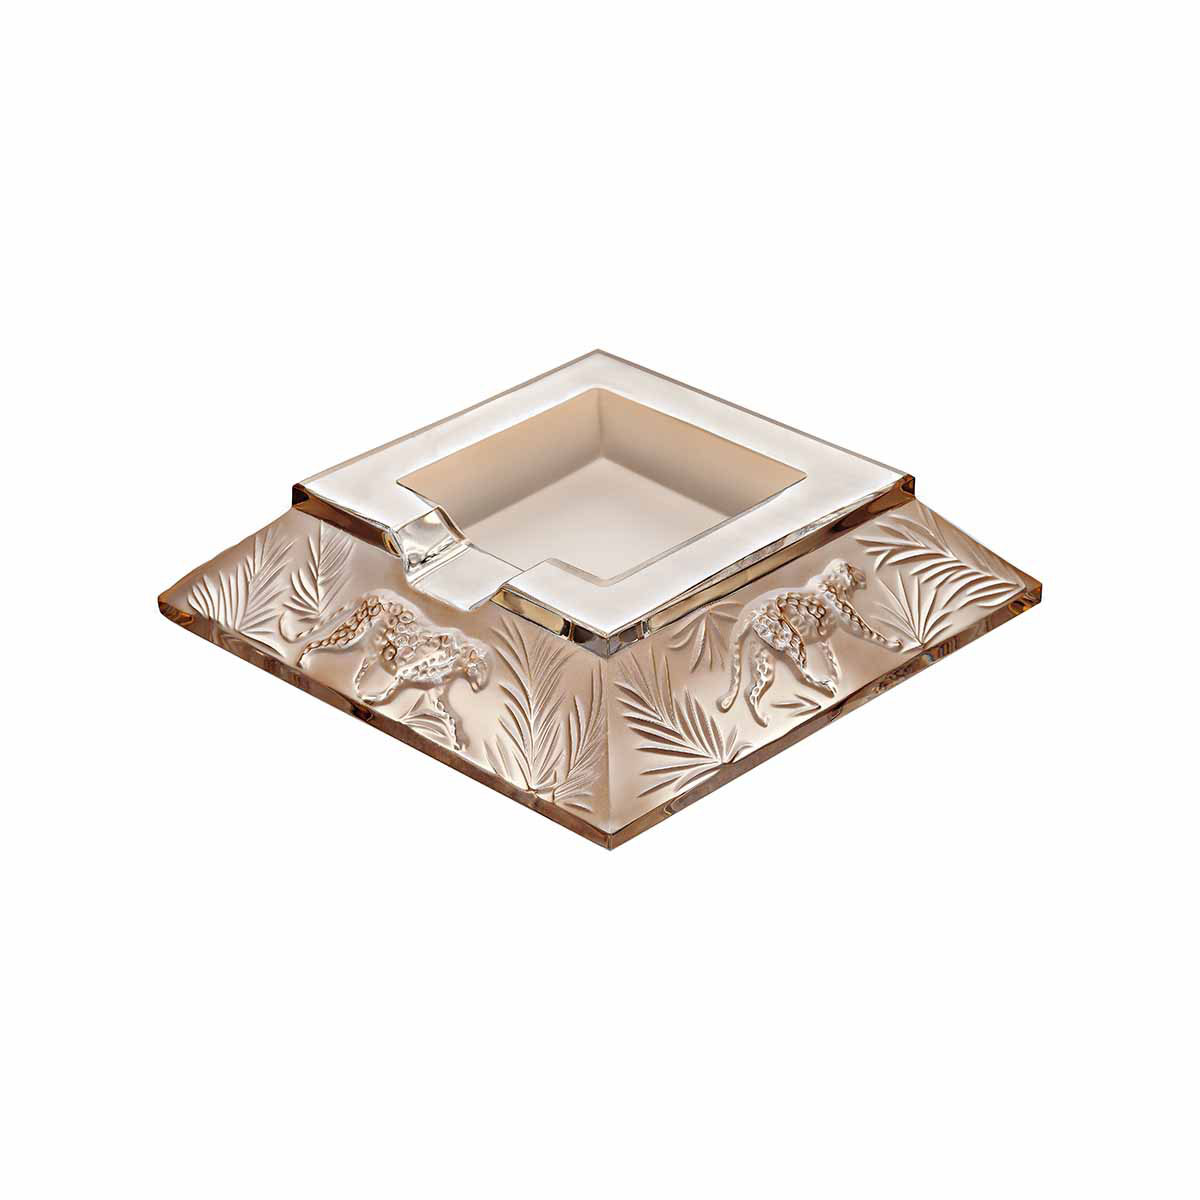 Lalique Jungle Crystal Ashtray, Gold Luster